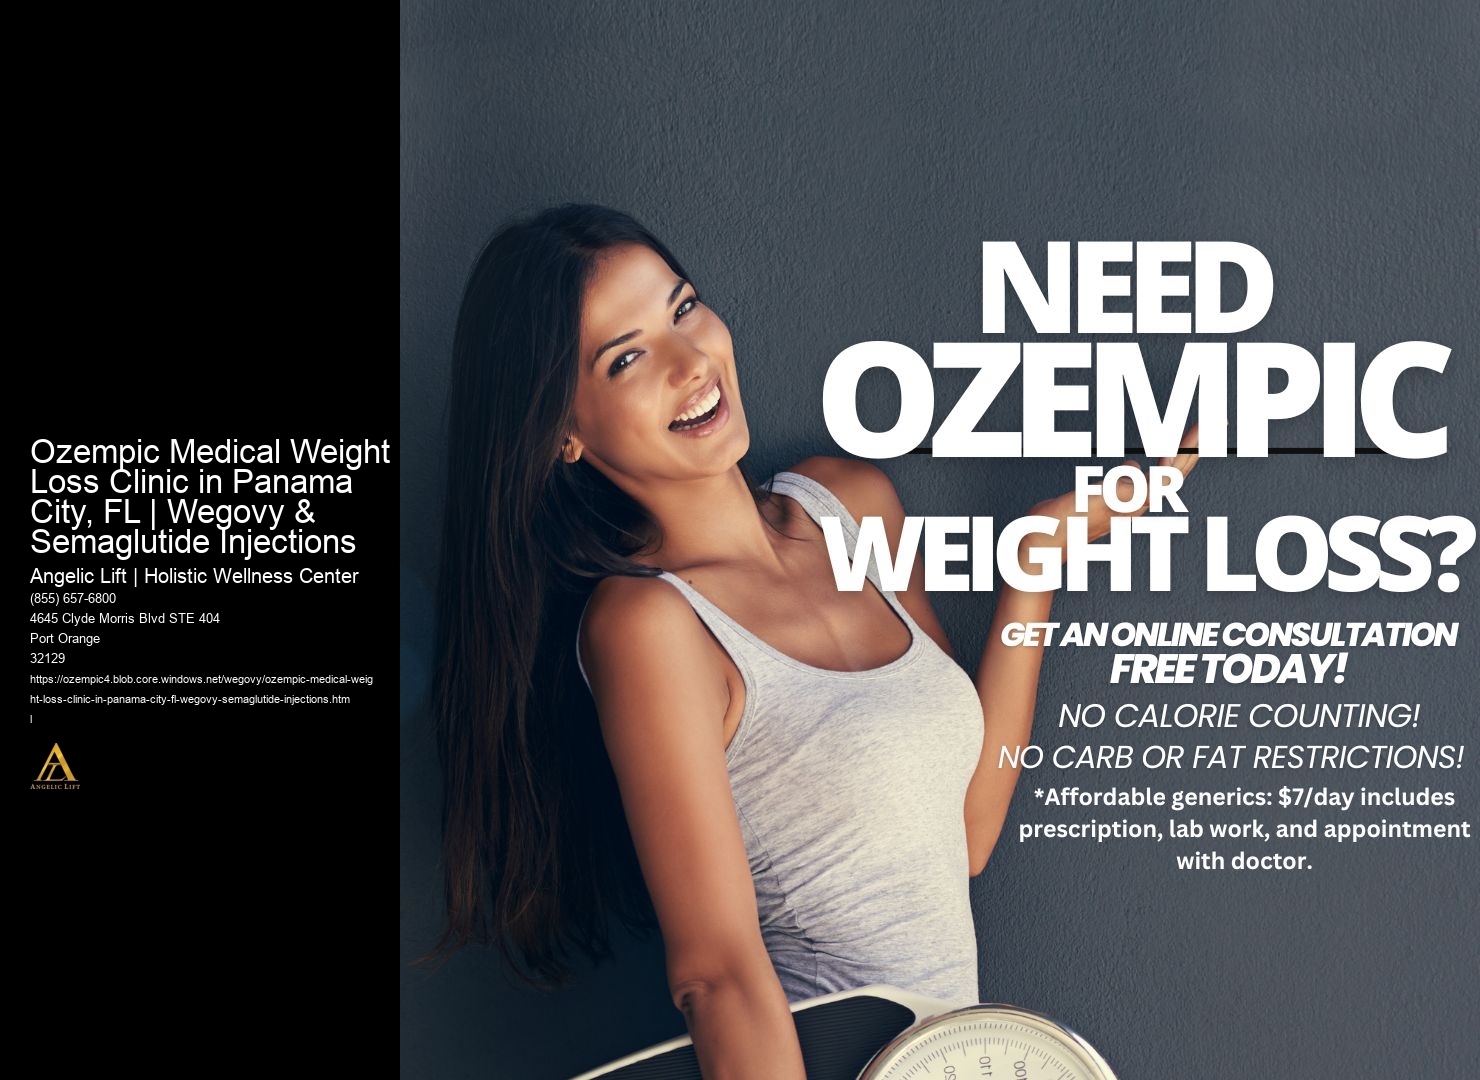 Ozempic Medical Weight Loss Clinic in Panama City, FL | Wegovy & Semaglutide Injections